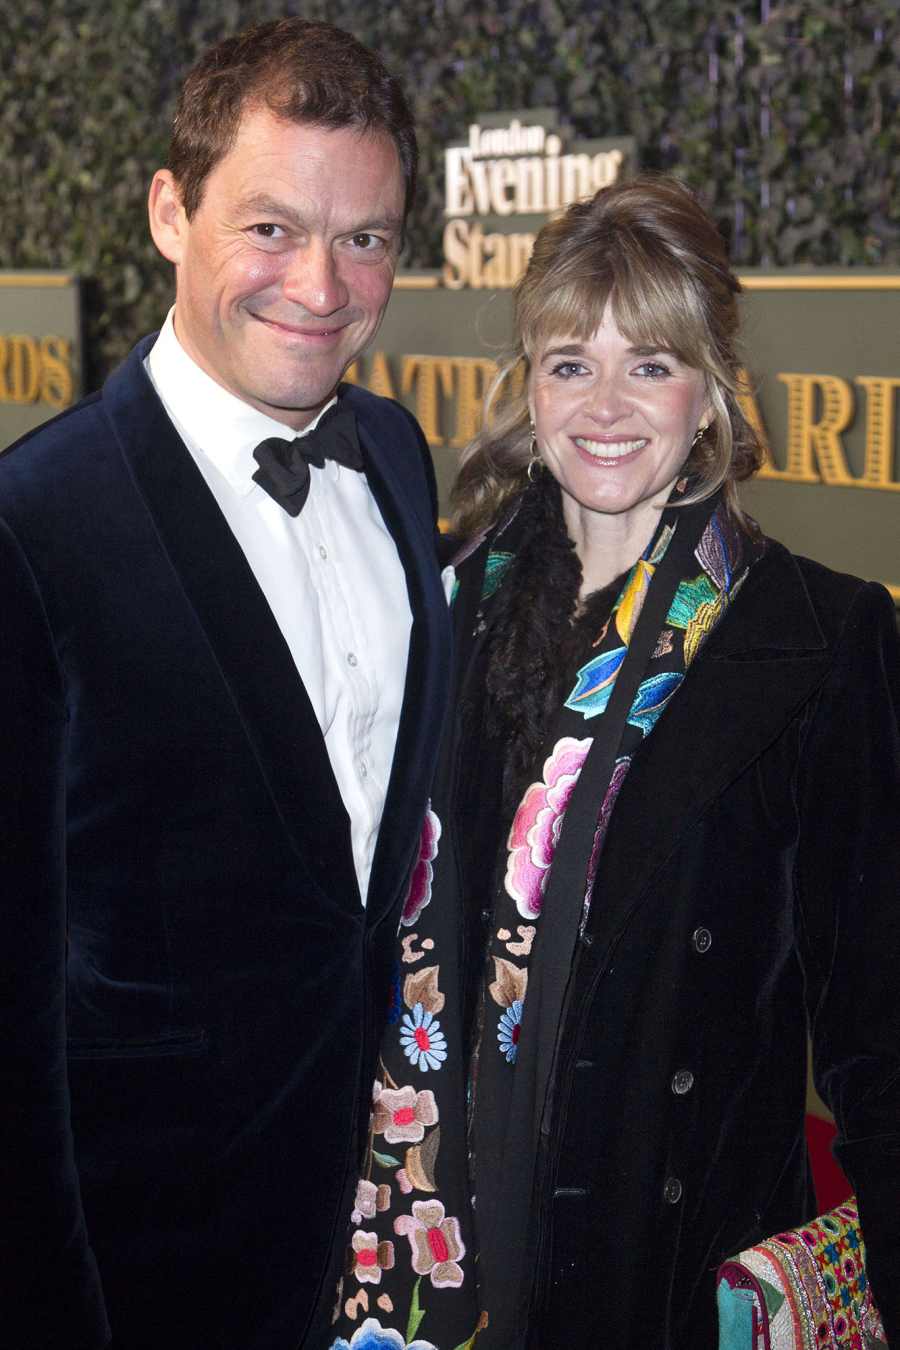 Marriage Took Pressure Off Dominic West and Catherine FitzGerald Most Peculiar Quotes About Marriage and Affairs